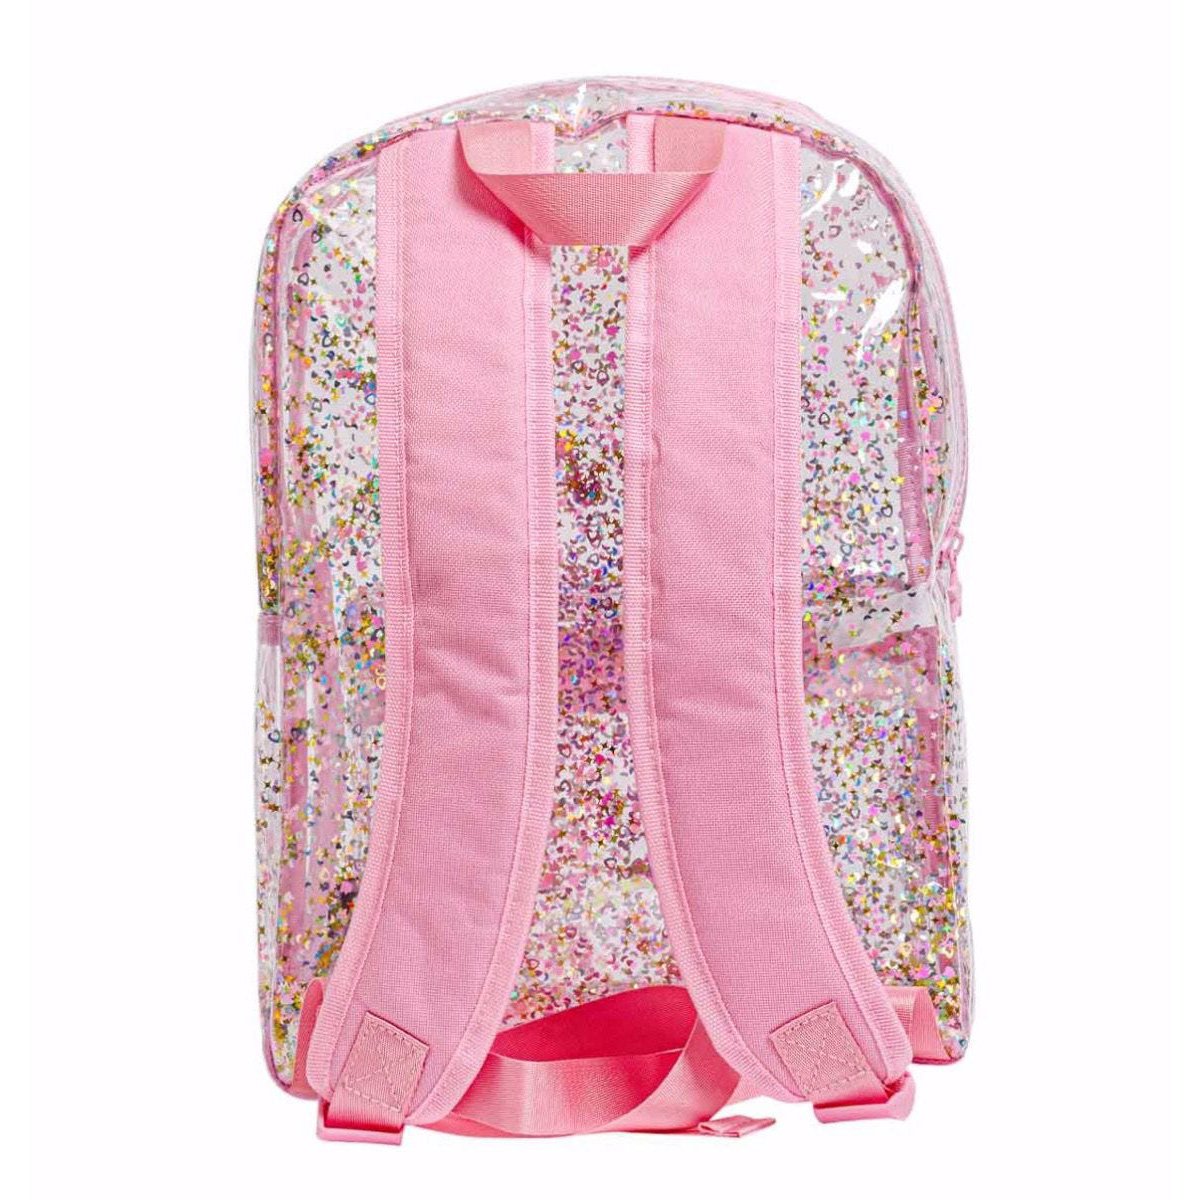 a-little-lovely-company-backpack-glitter-transparent-pink- (3)